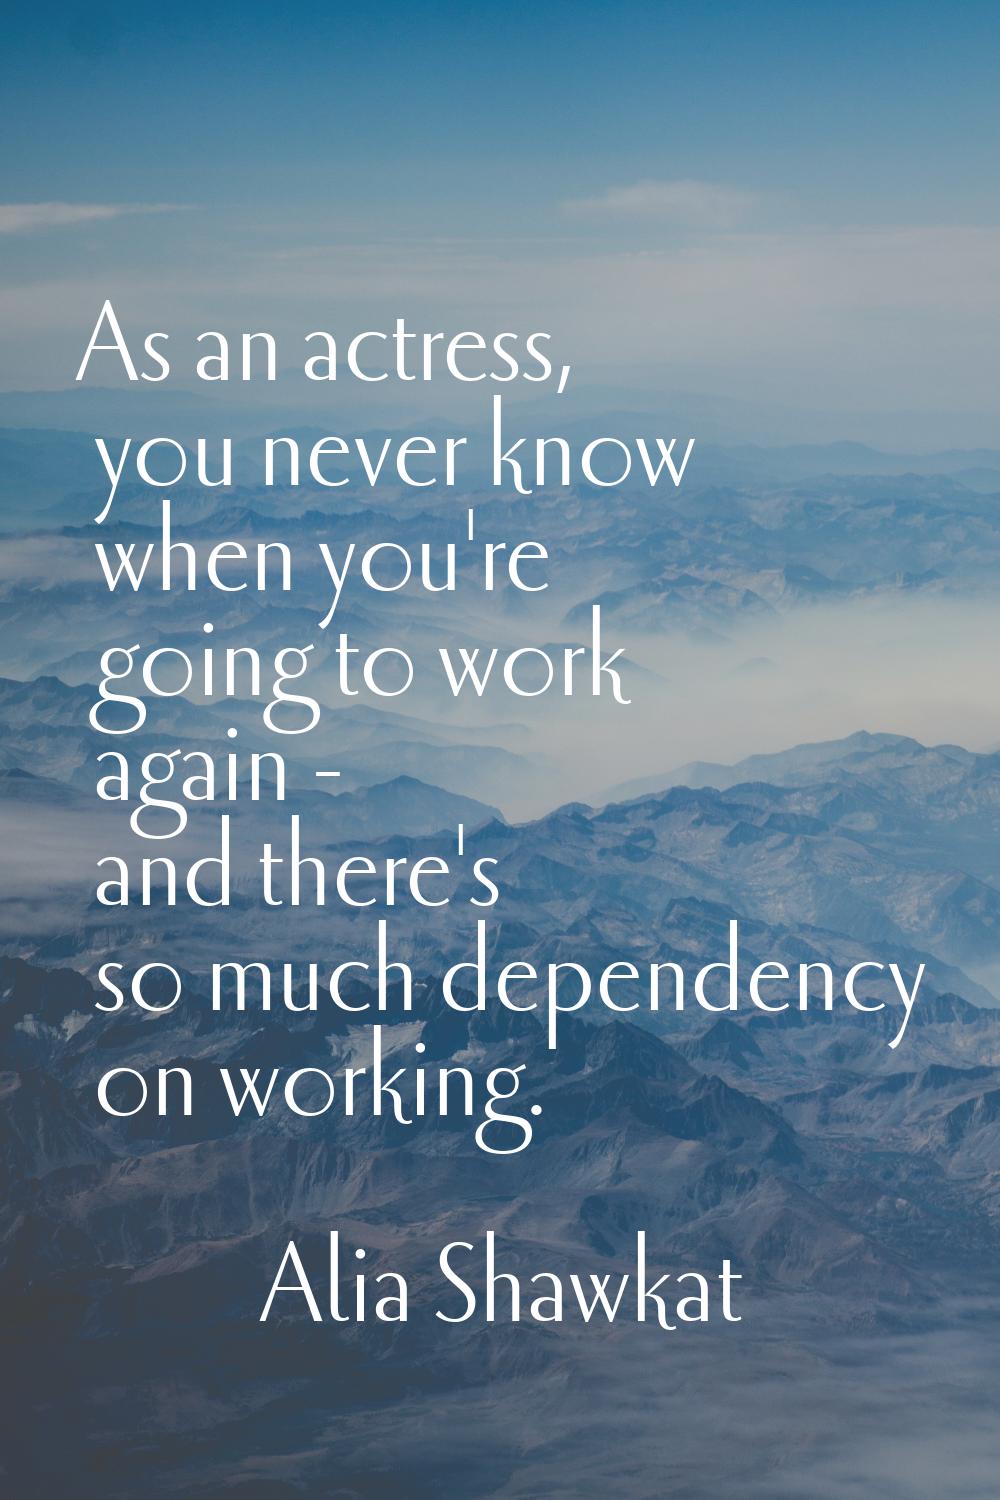 As an actress, you never know when you're going to work again - and there's so much dependency on w